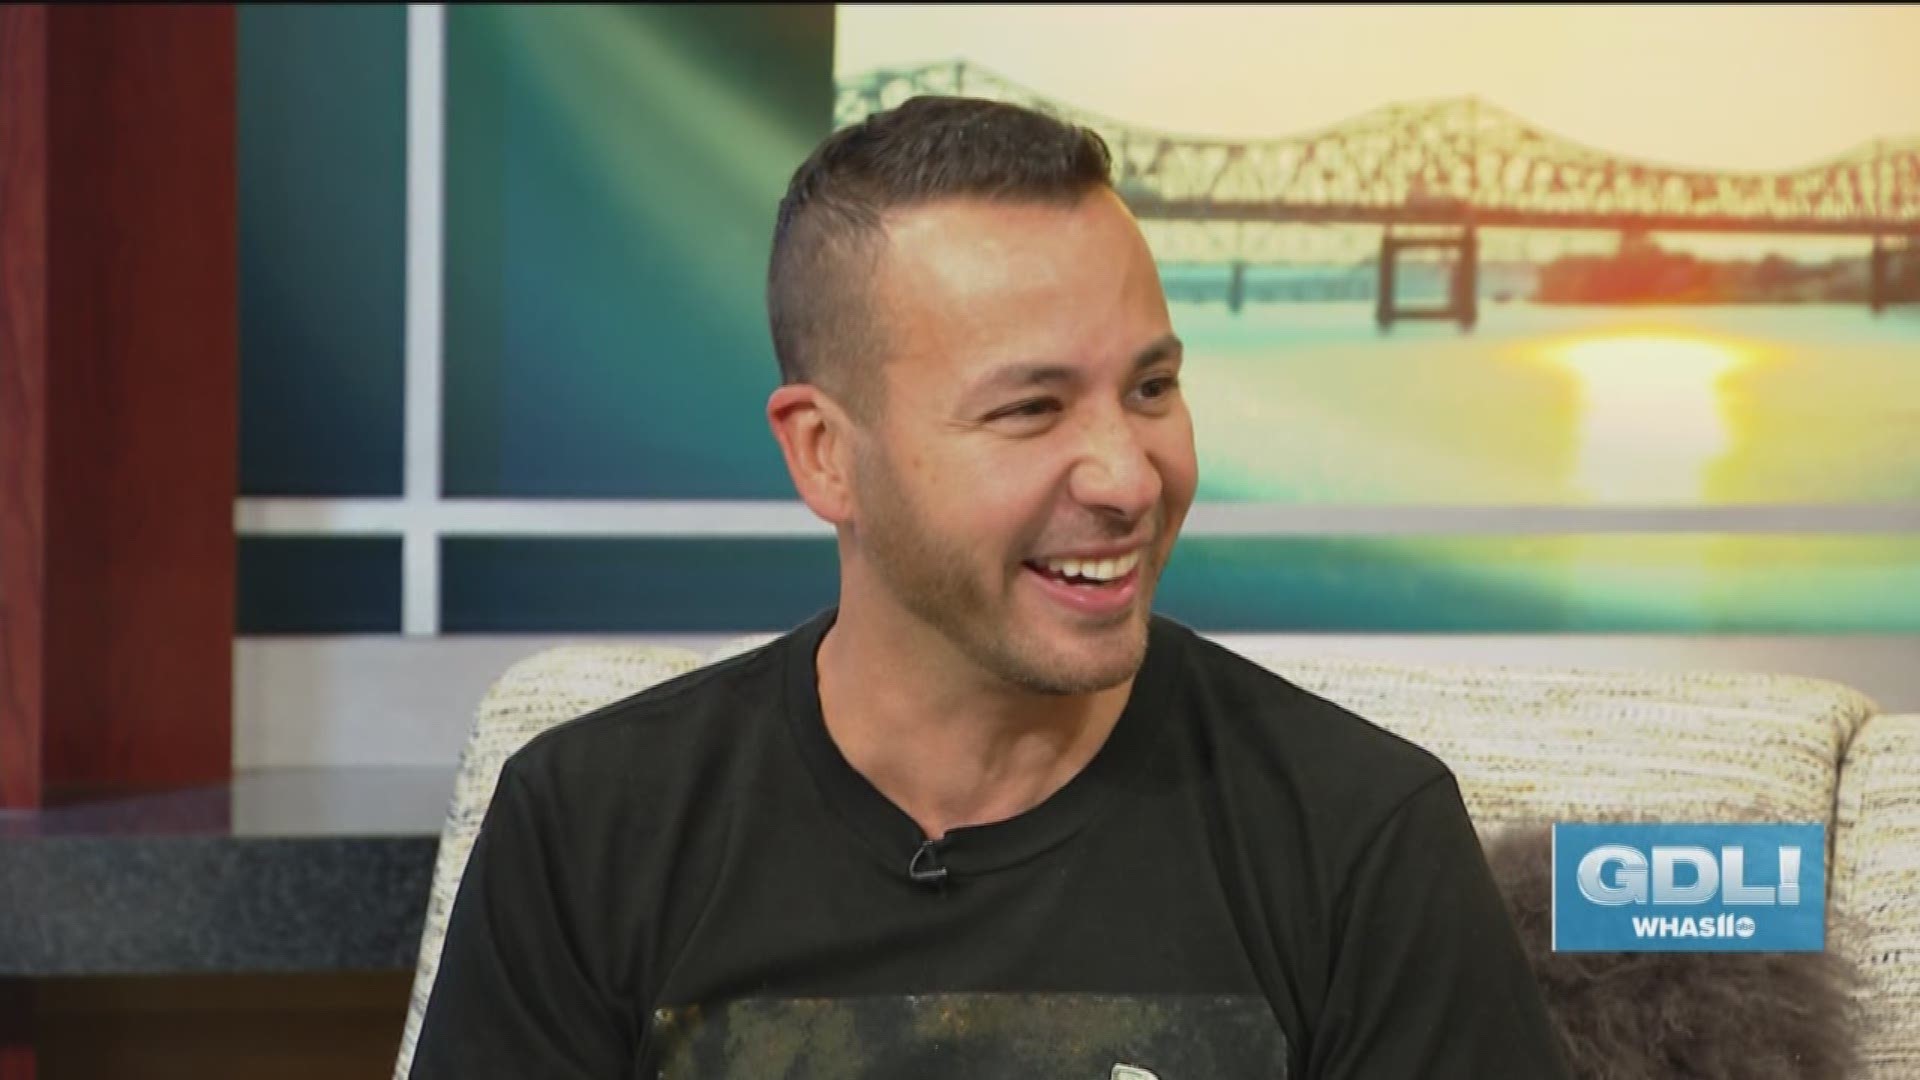 Howie Dorough has been performing with the Backstreet Boys since he was 19 years old. His new album "Which One Am I?" looks back at his life before becoming a star, and he's hoping his latest music connects with both his original fans and their children, too.